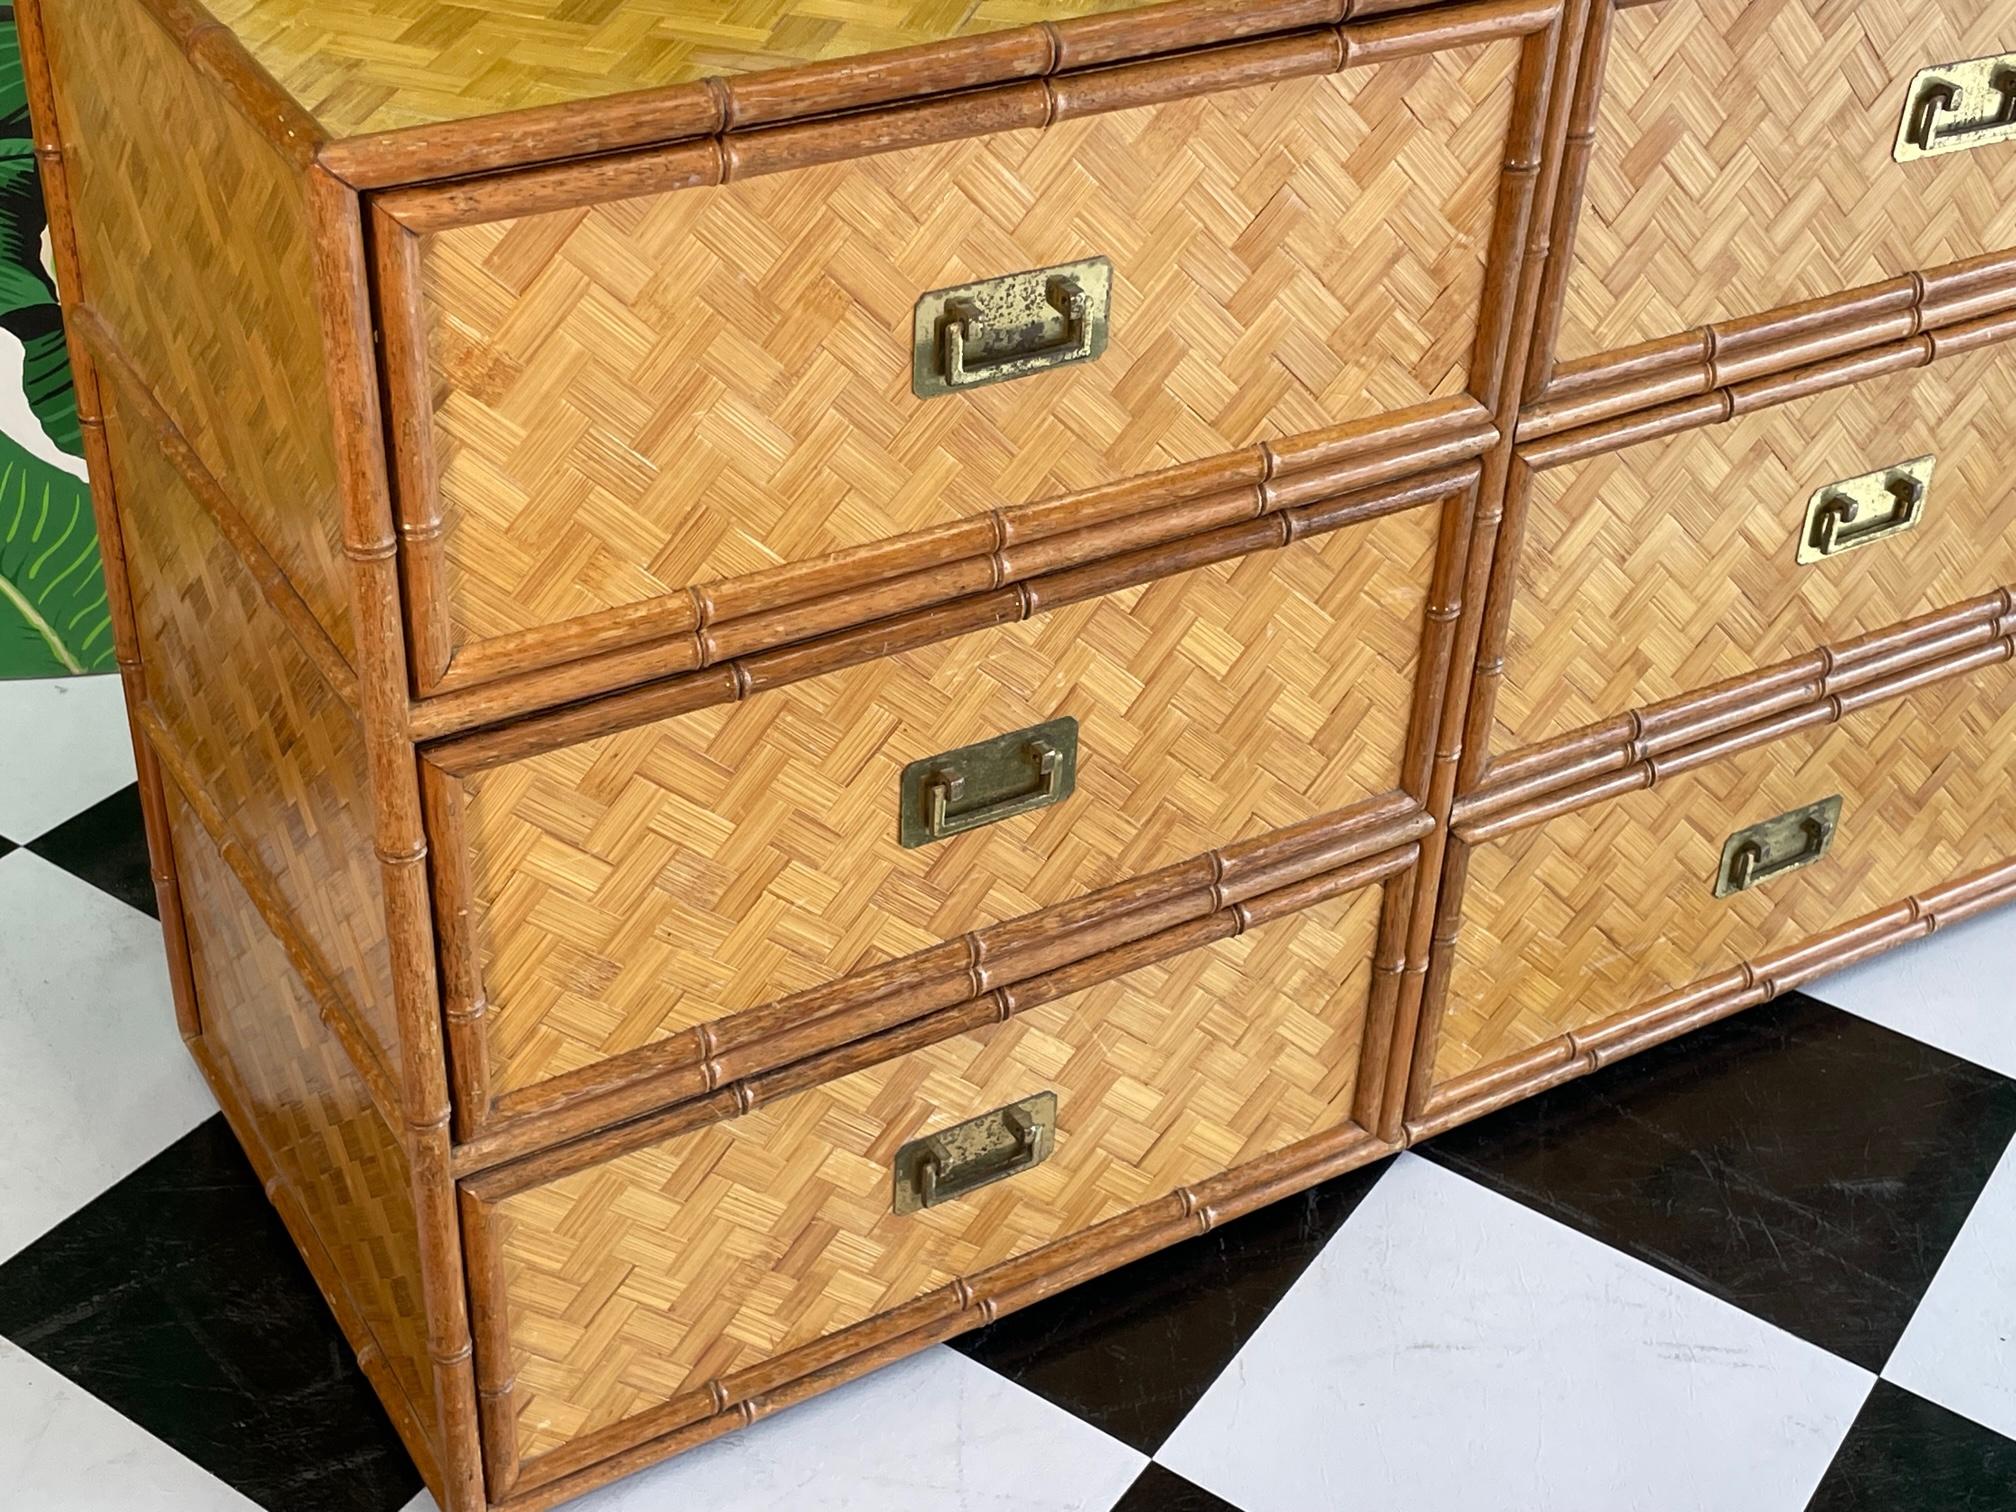 Faux bamboo double dresser with full basketweave cane veneer. Brass campaign style hardware. Good vintage condition with imperfections consistent with age, see photos for condition details.
For a shipping quote to your exact zip code, please message